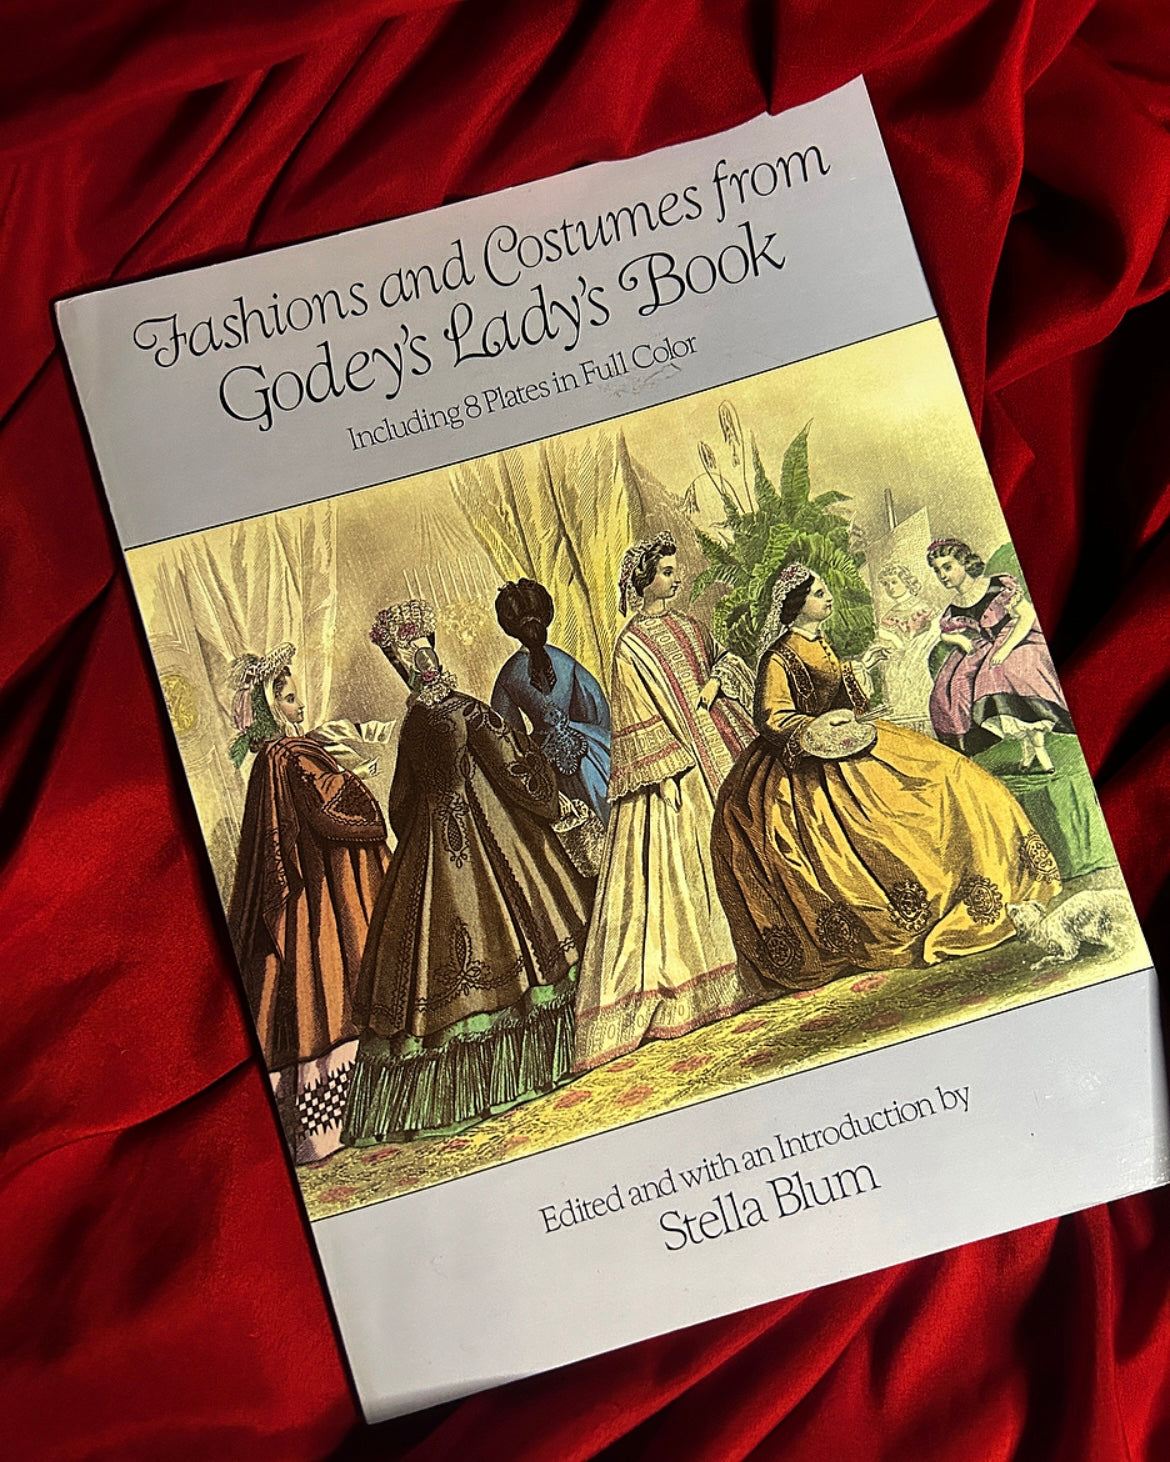 Fashions and Costumes from Godey's Lady's Book